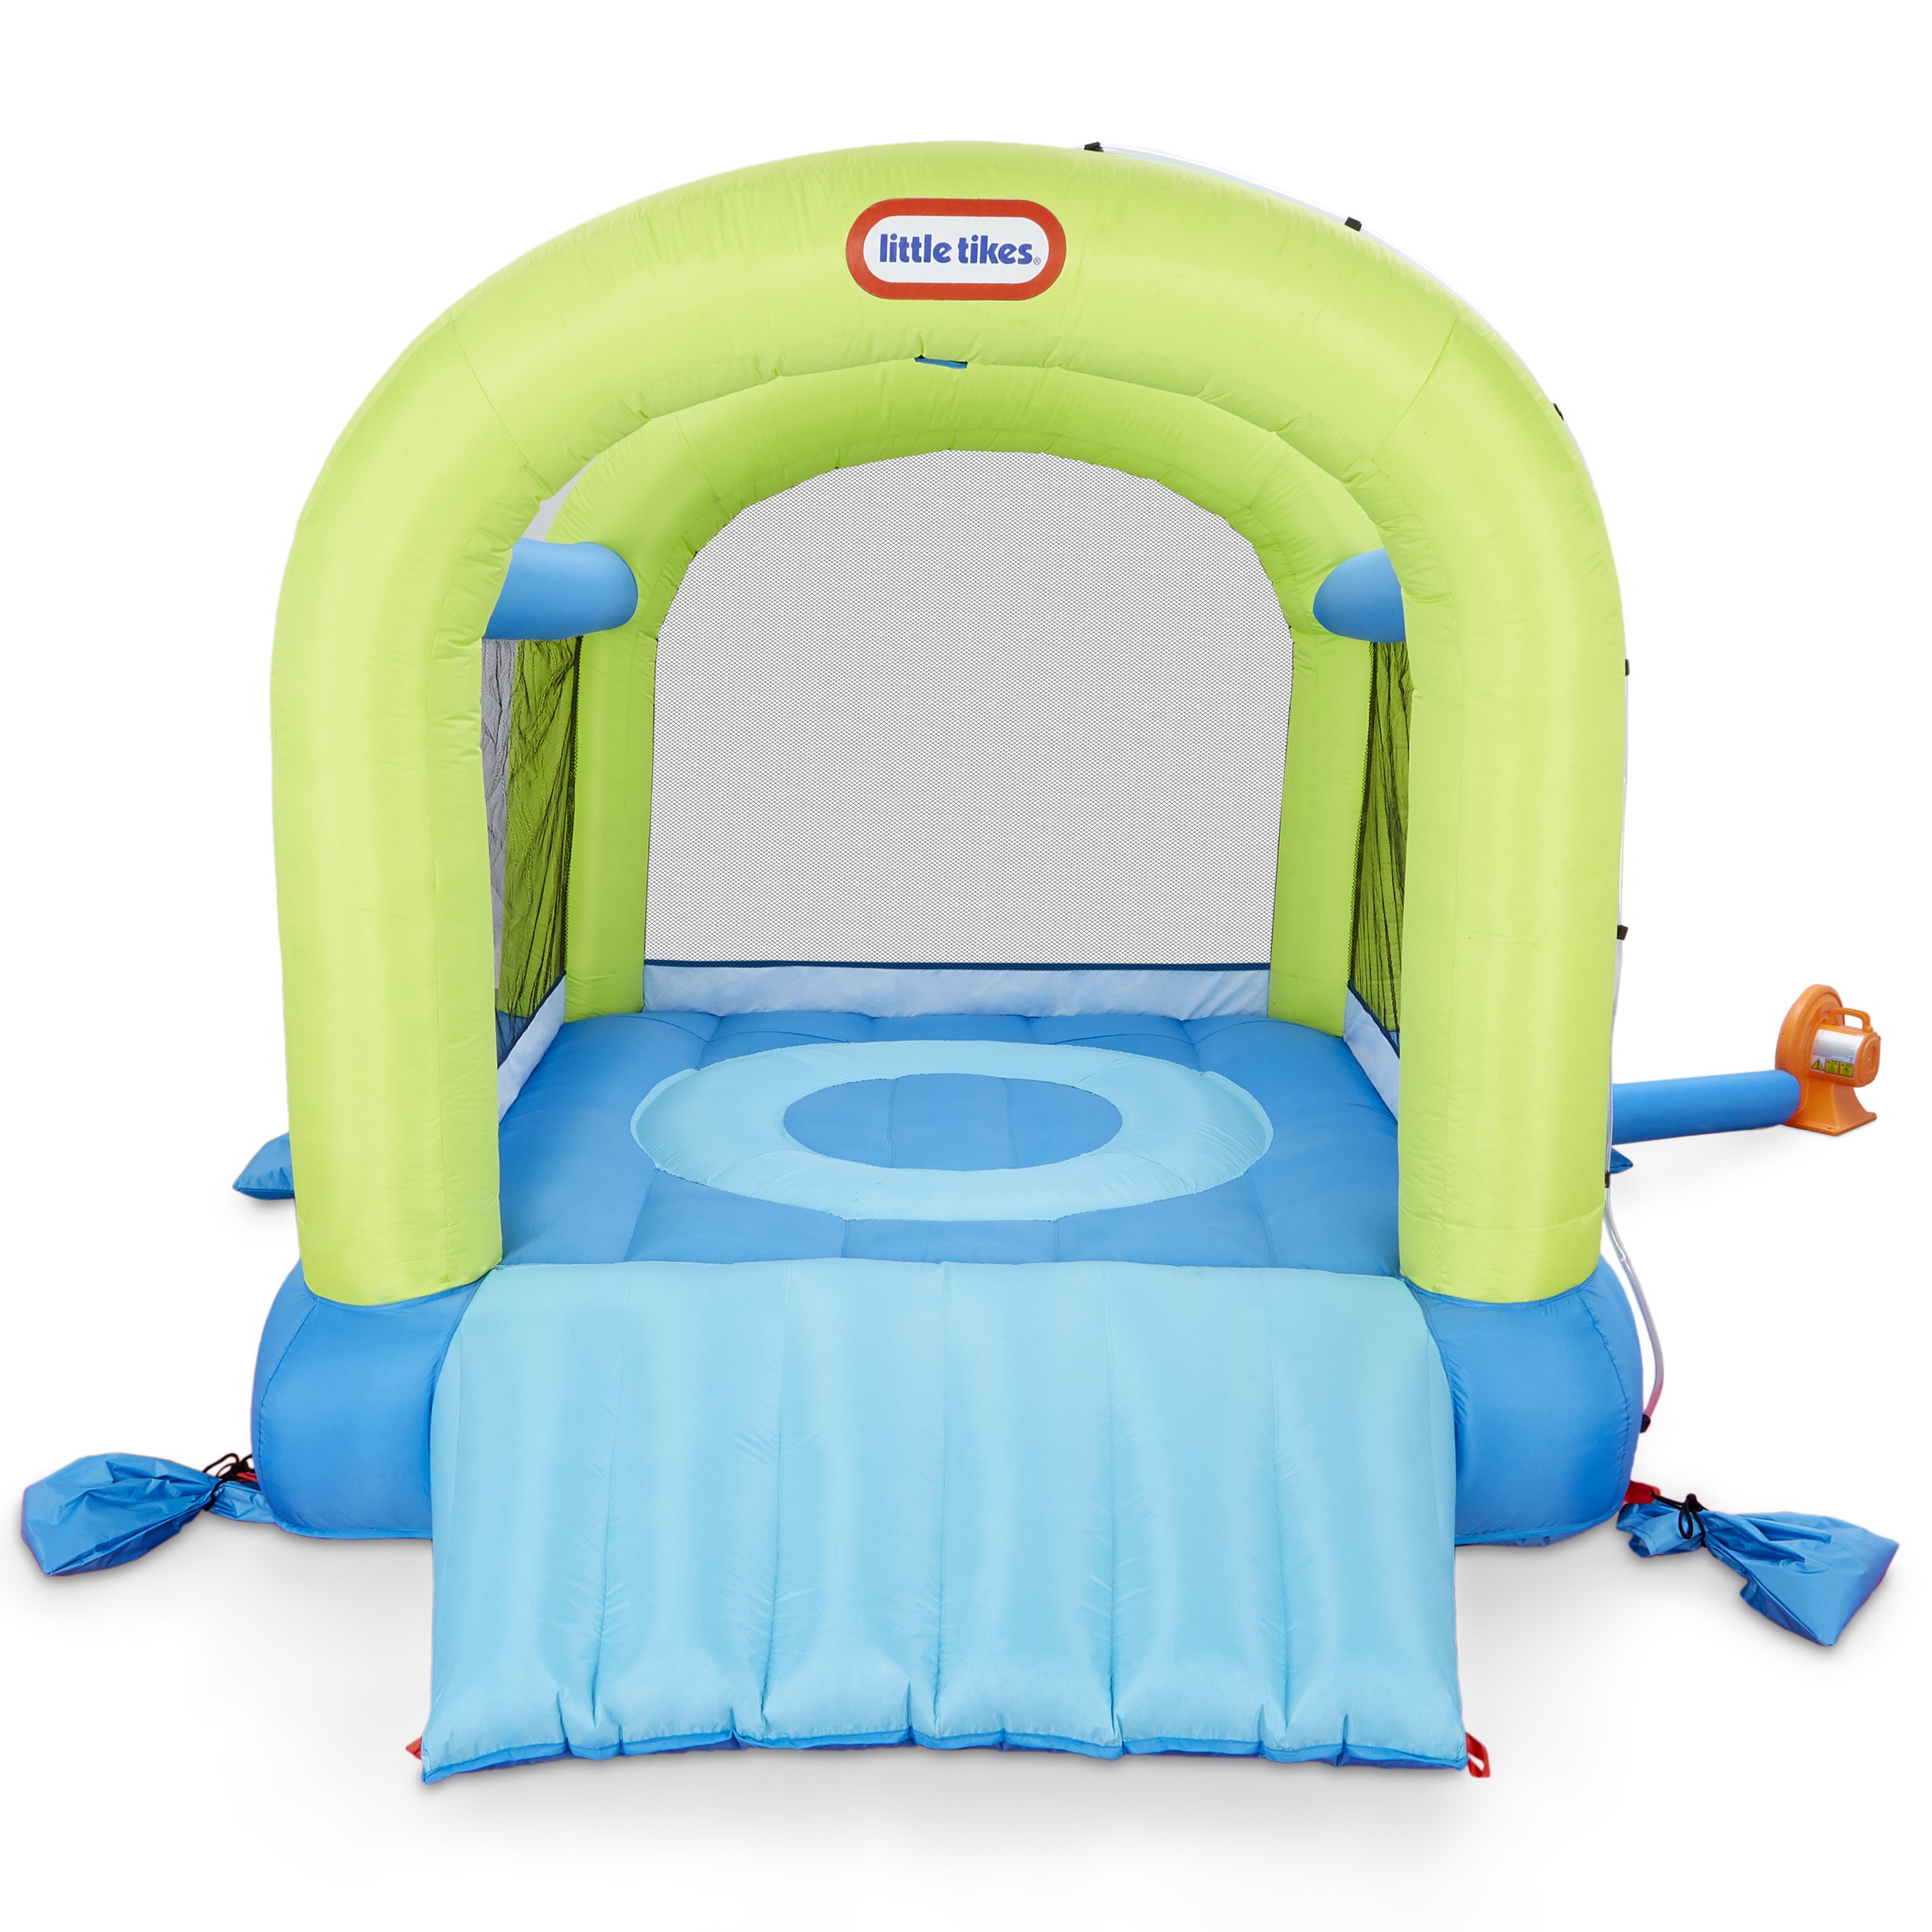 Little Tikes Splash n' Spray Outdoor Indoor 2-in-1 Inflatable Bounce House with Slide, Water Spray and Blower, Fits 2 Kids, Backyard Toy For Boys Girls Ages 3-8 Years - image 1 of 7